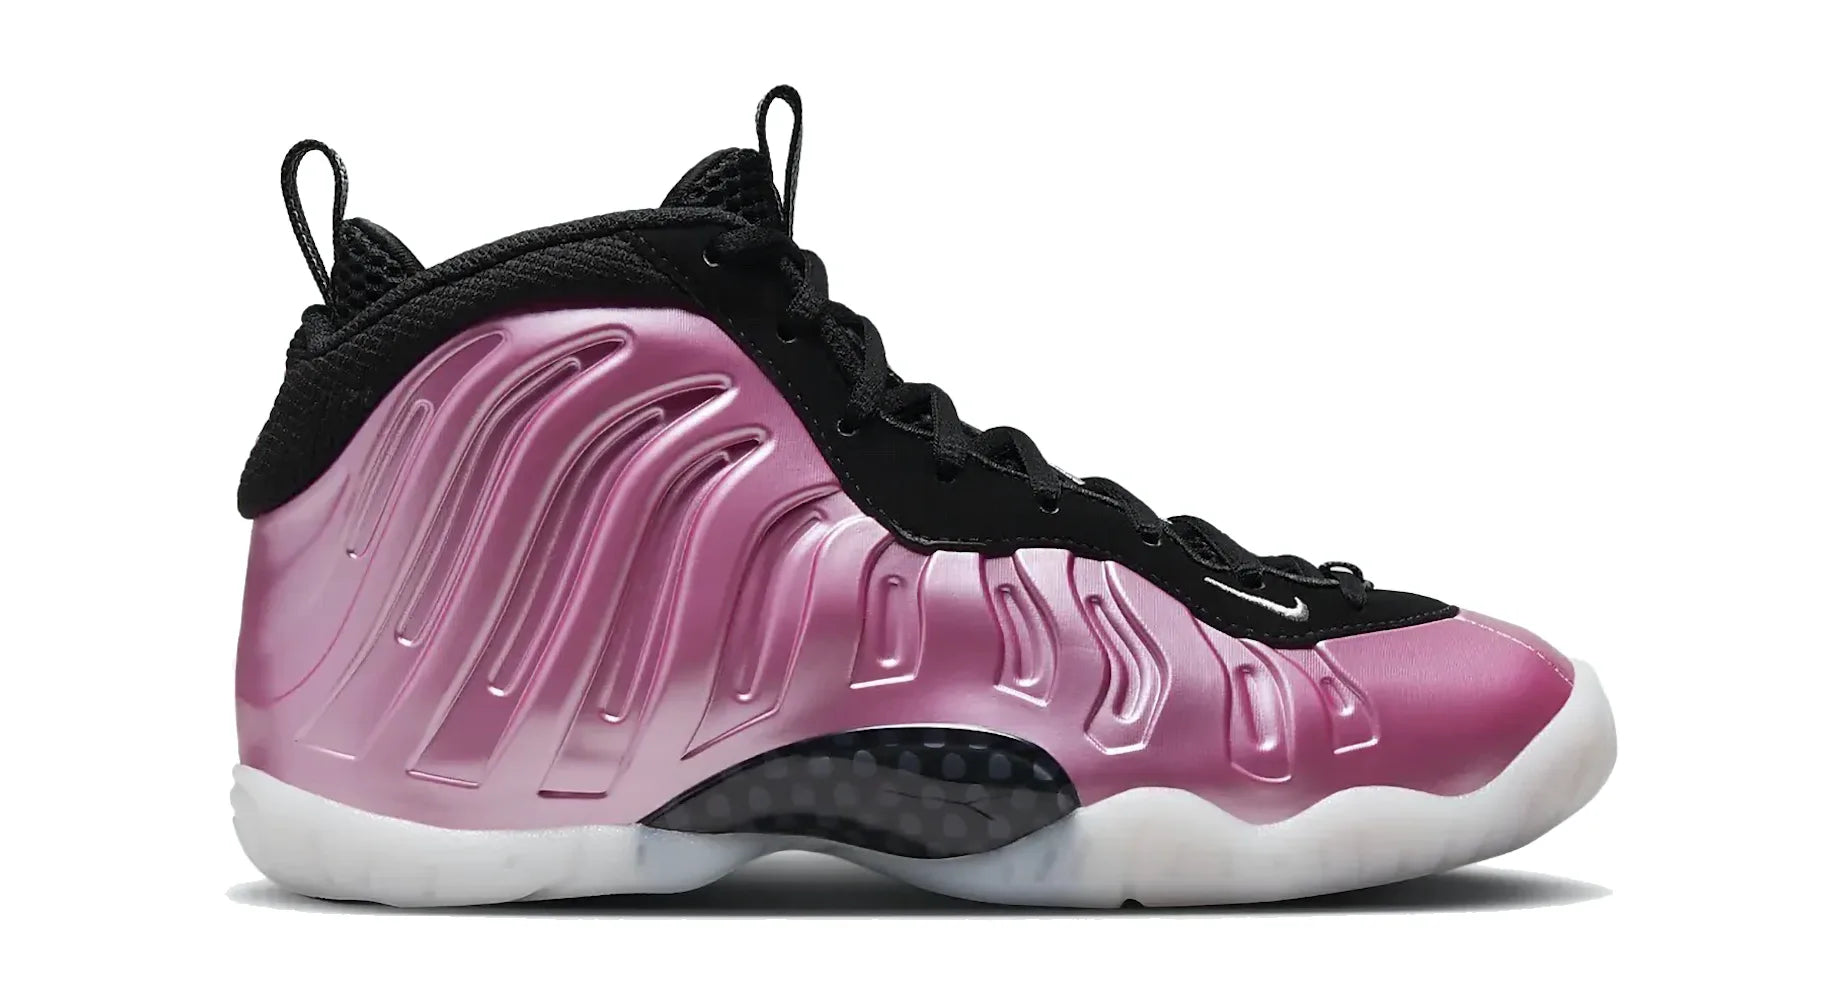 Nike Little Posite One Polarized Pink (GS)